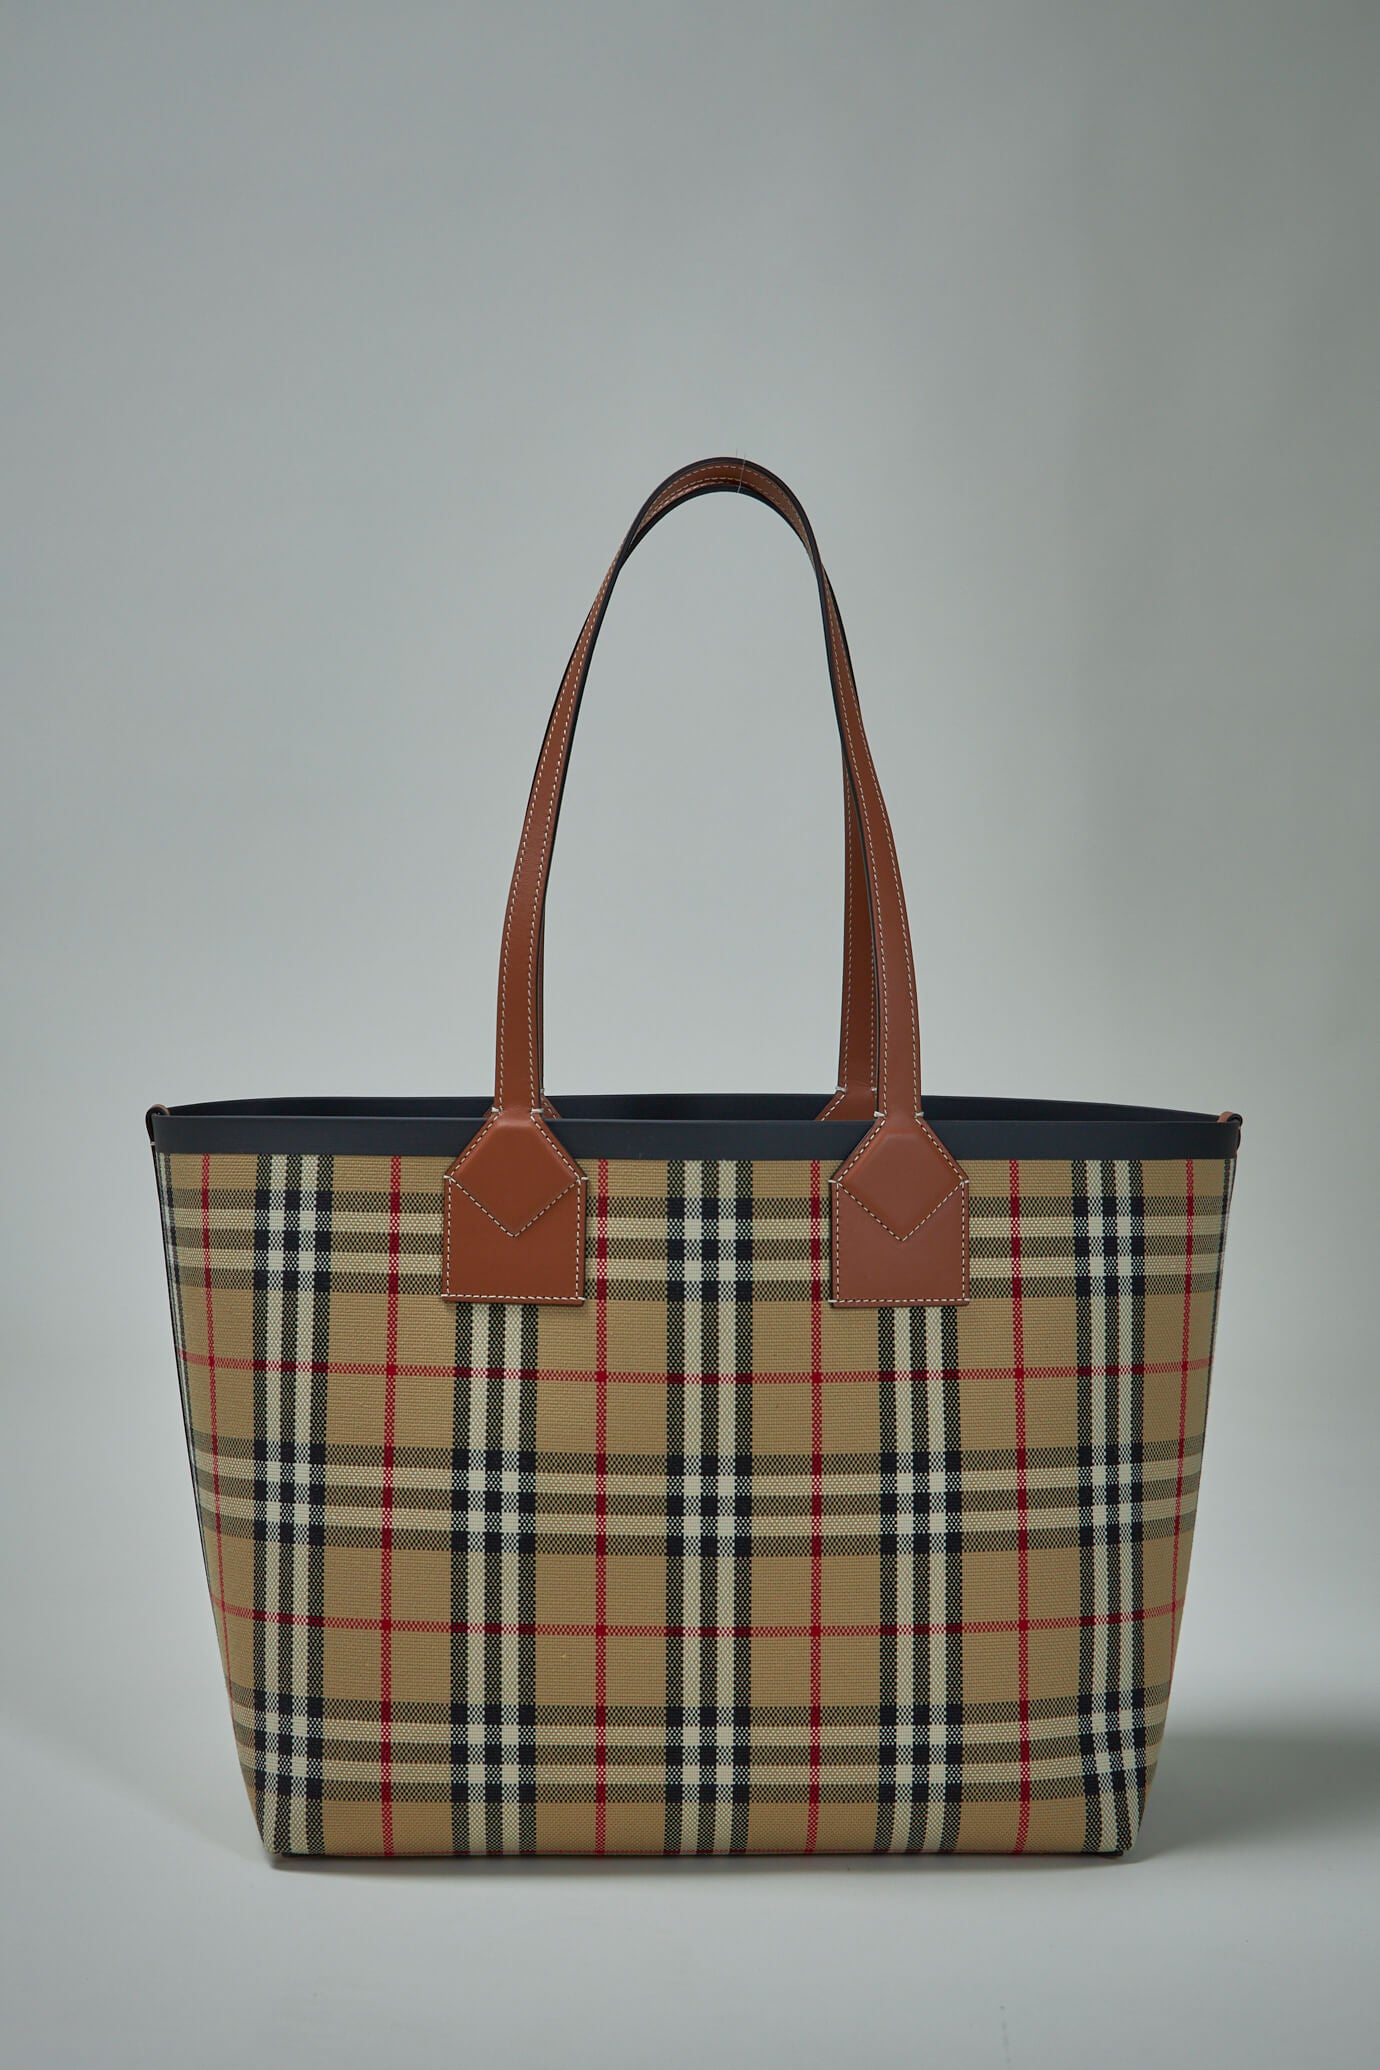 MD London Tote / brown